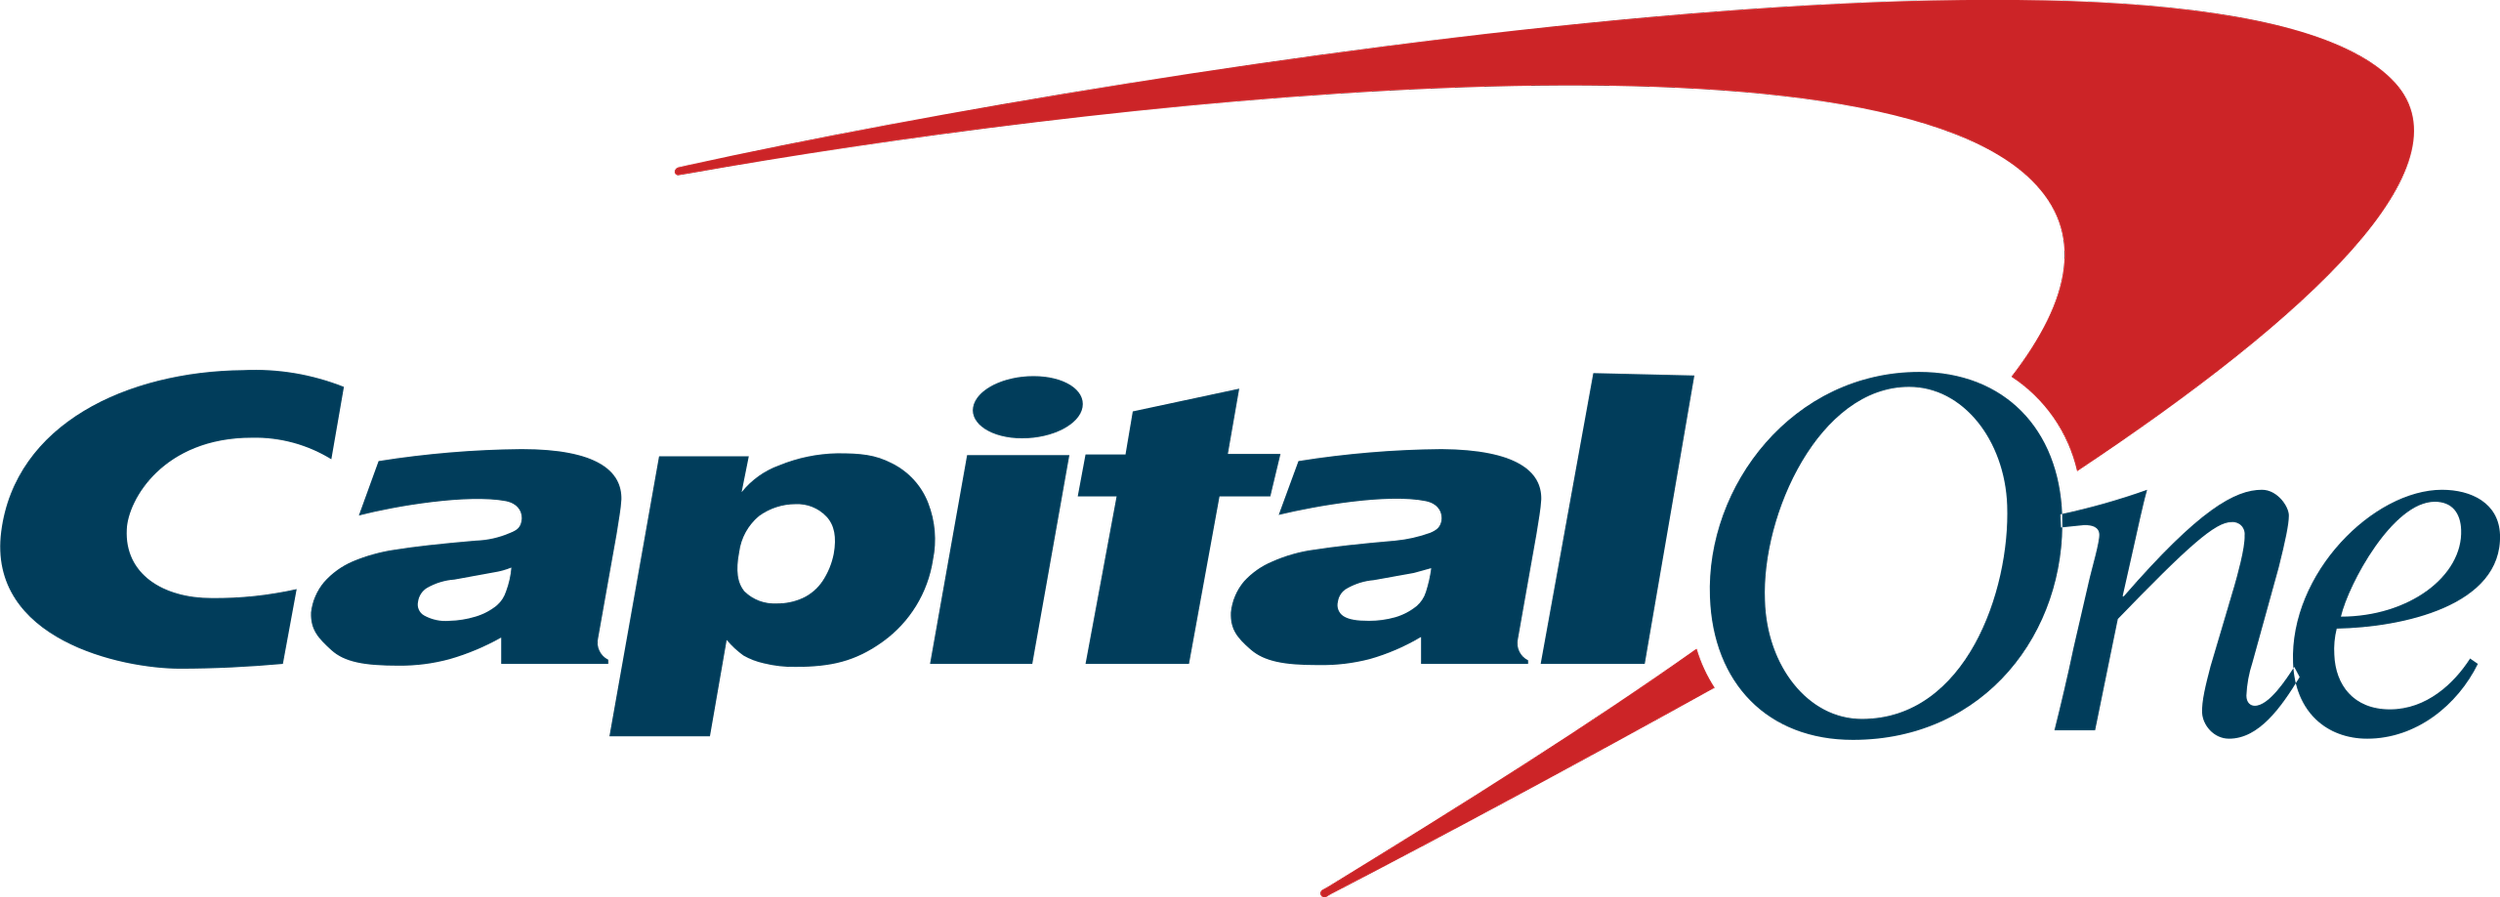 Capital_One_logo.svg.png